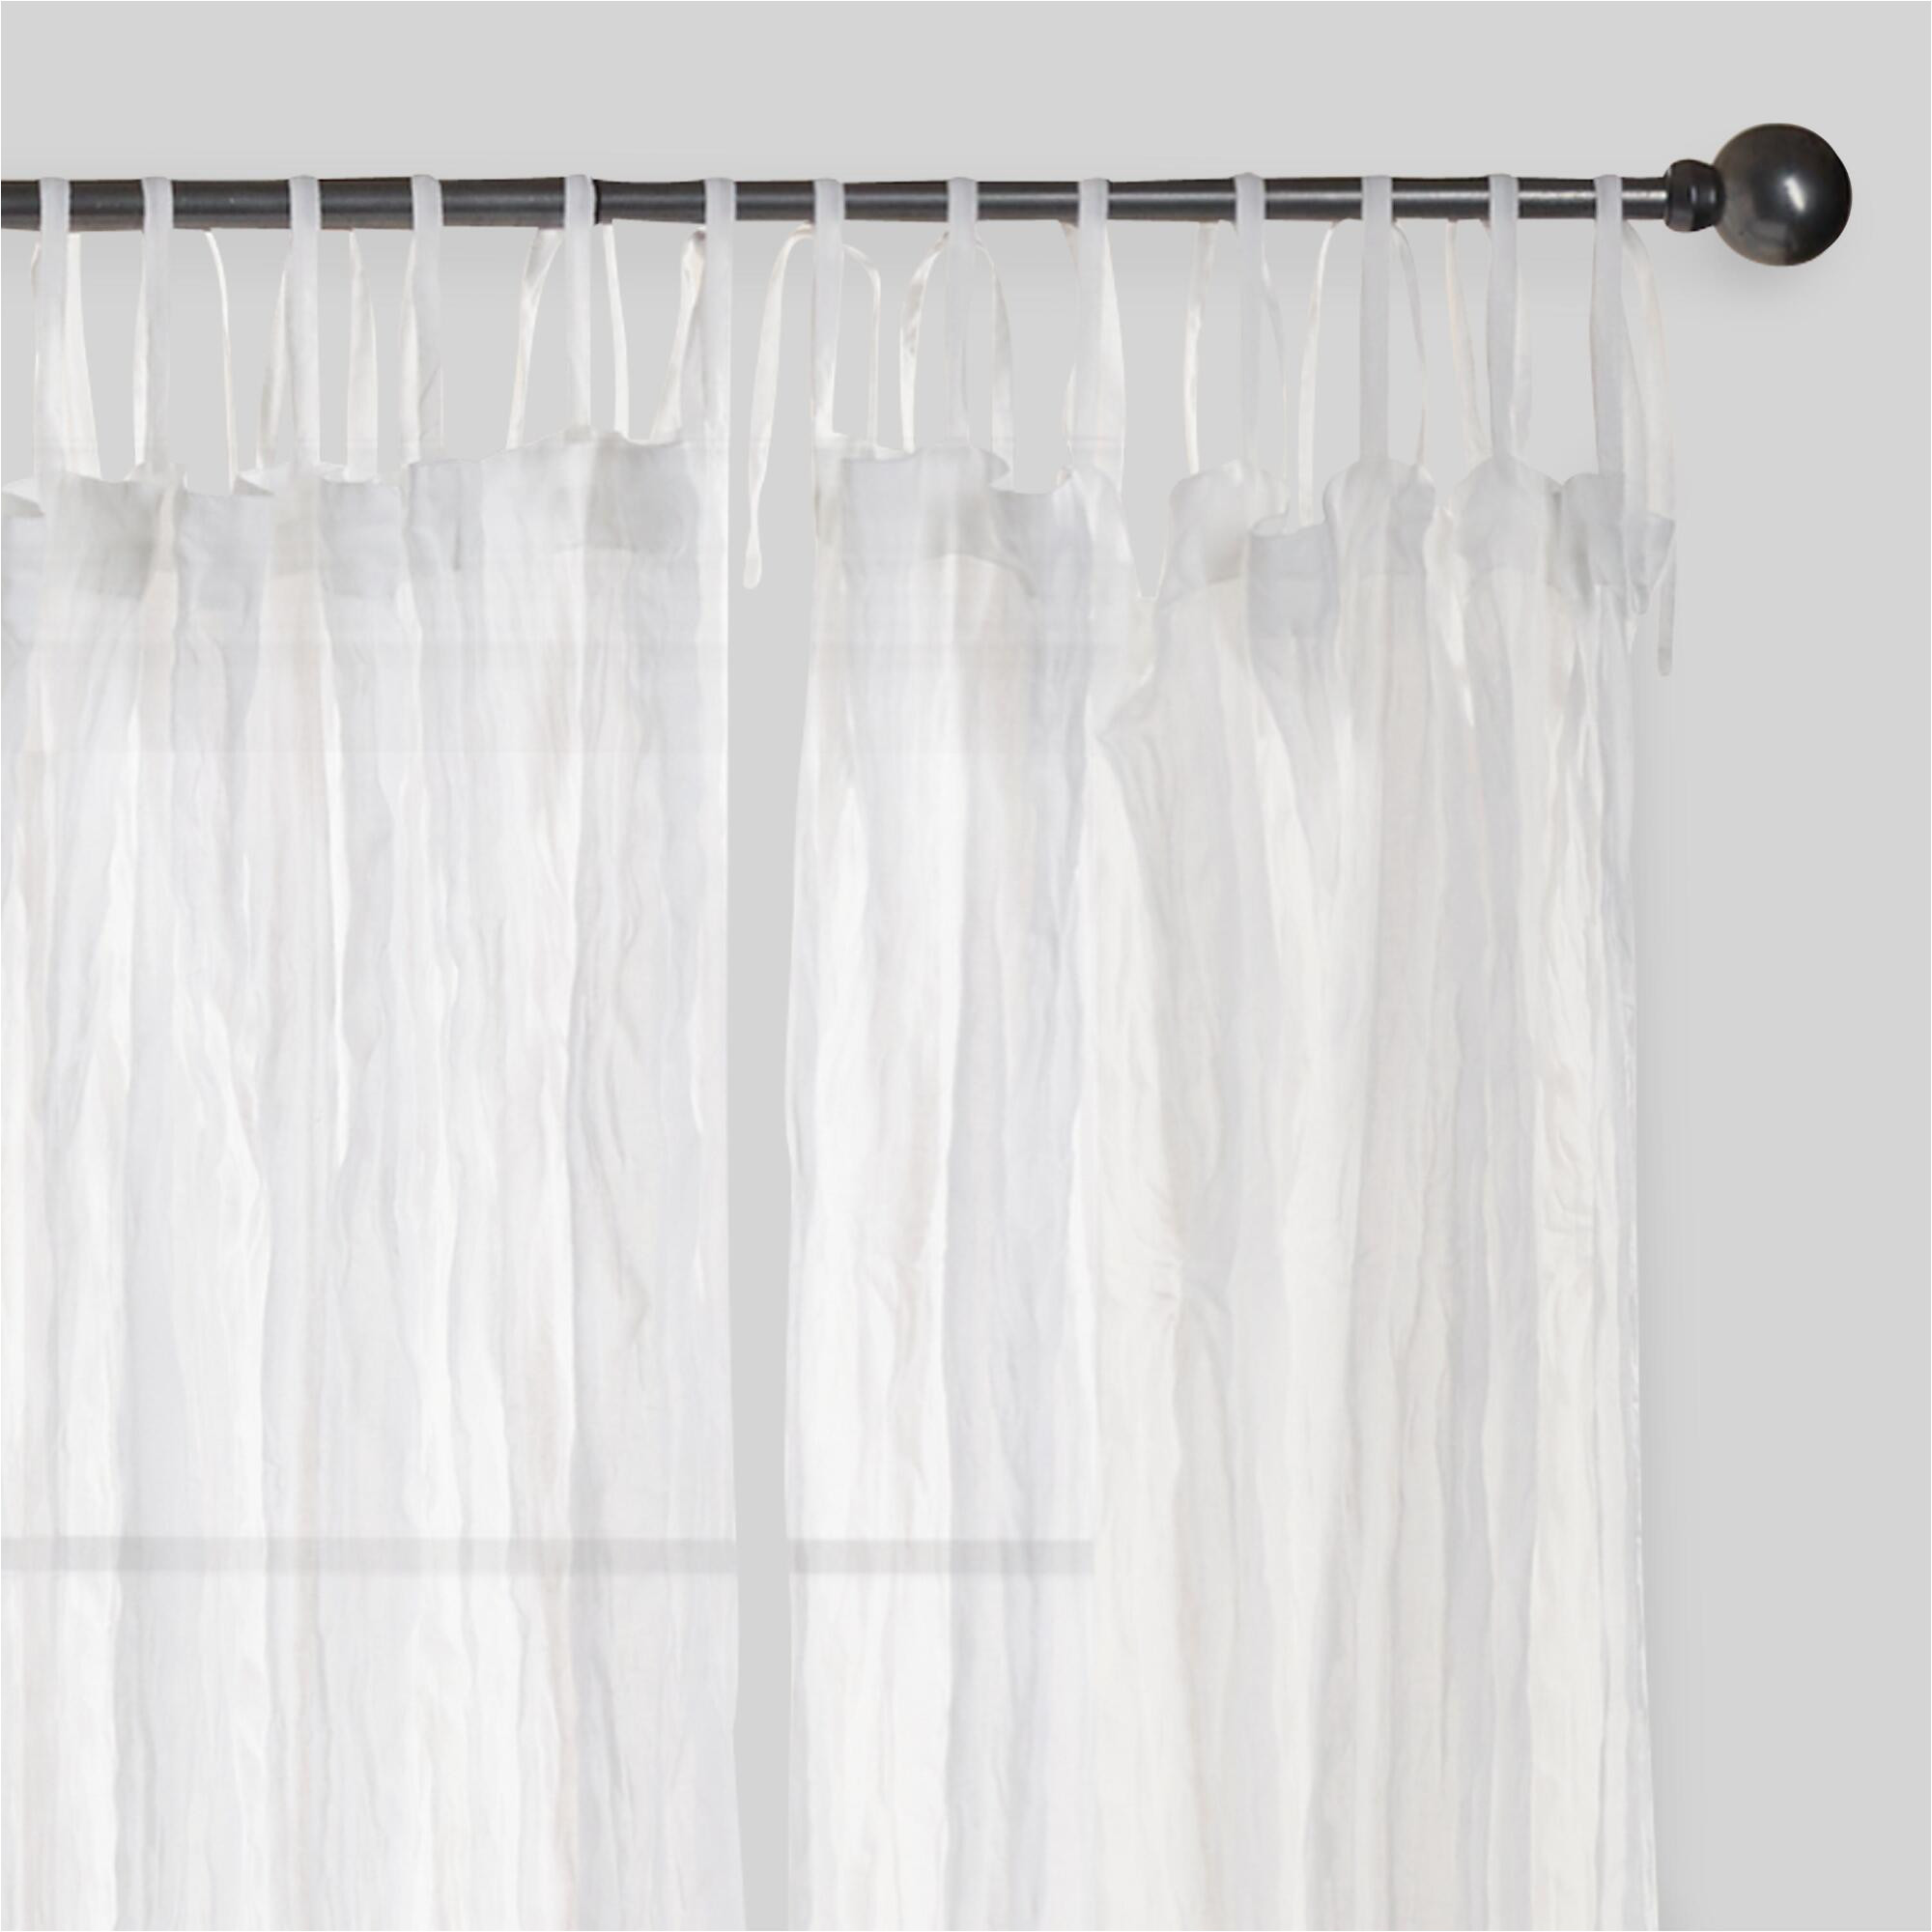 white crinkle sheer voile cotton curtains set of 2